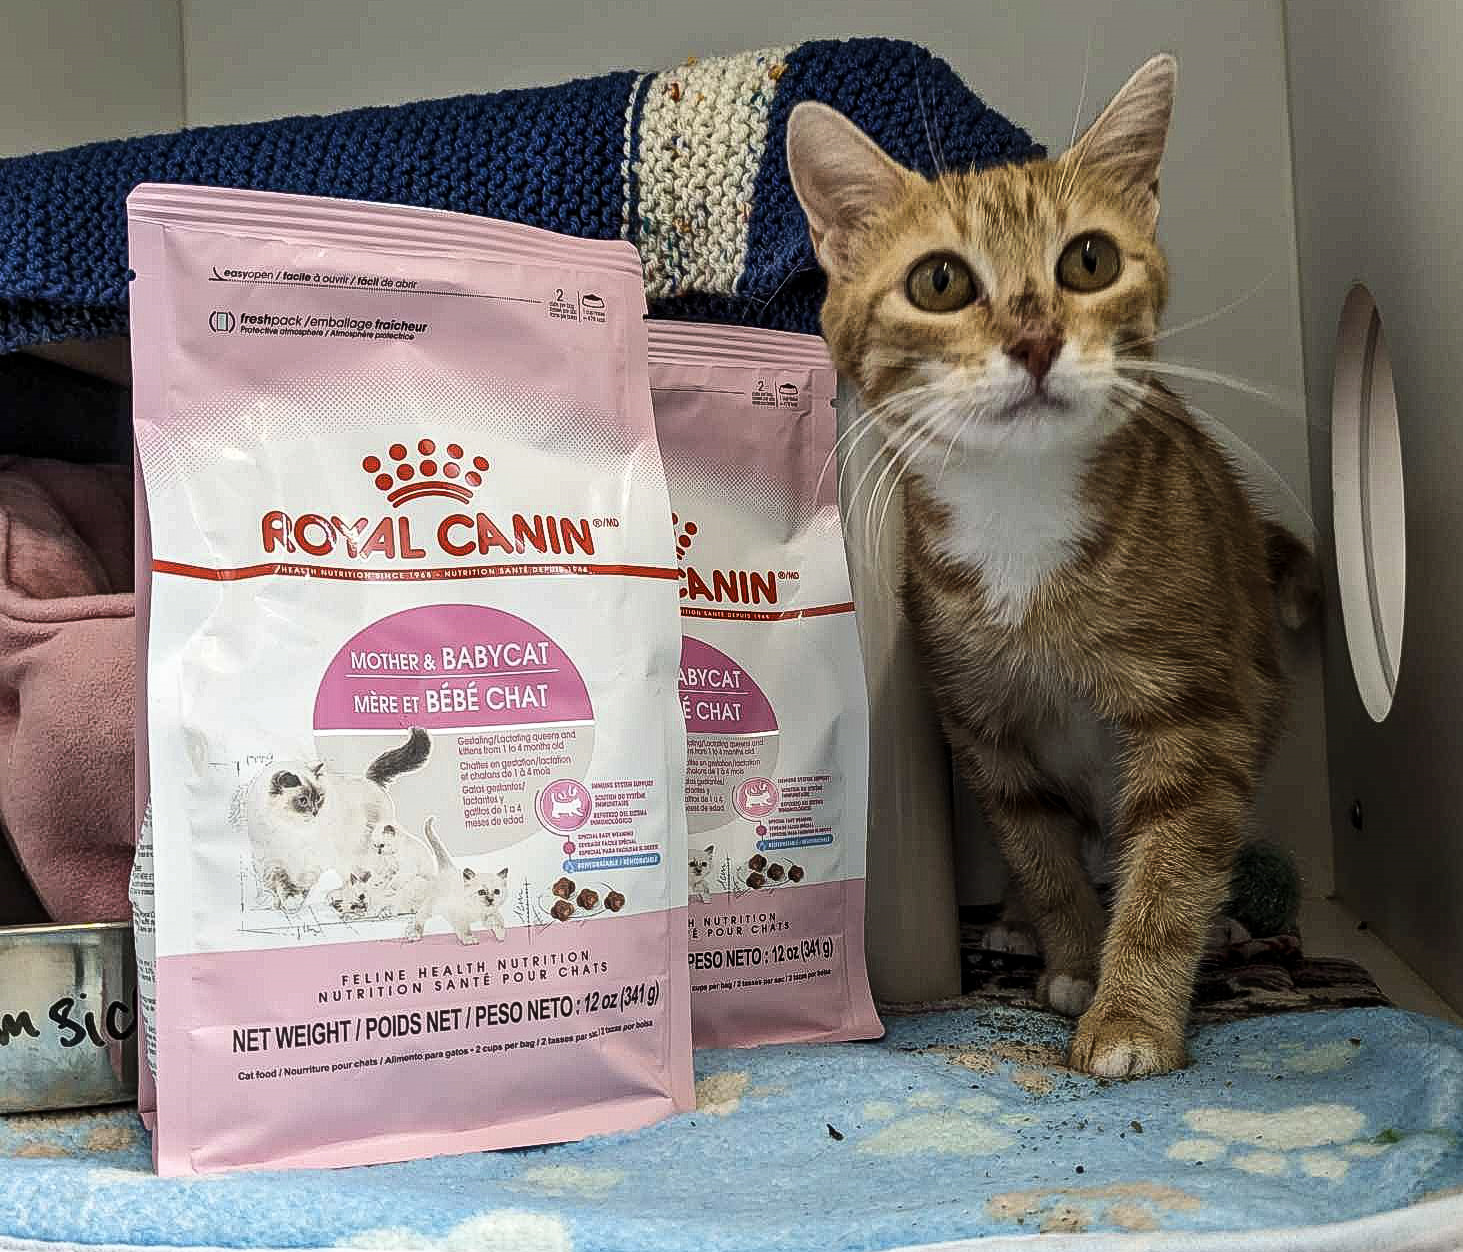 Kitten standing next to a bag of Royal Canin cat food. 